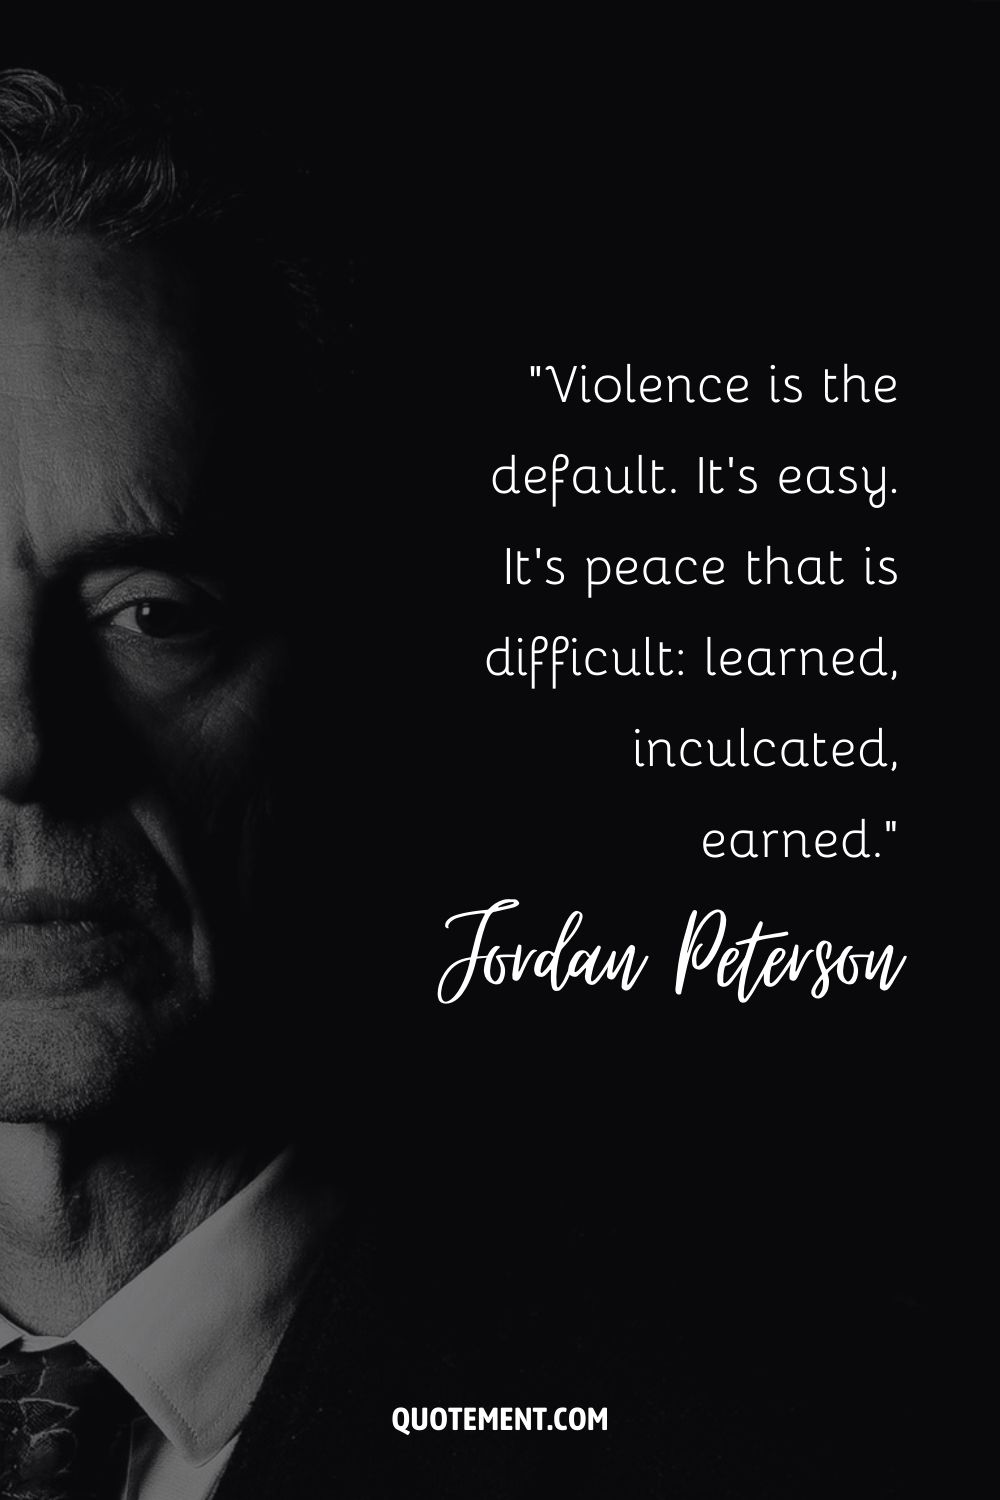 Violence is the default. It’s easy. It’s peace that is difficult learned, inculcated, earned